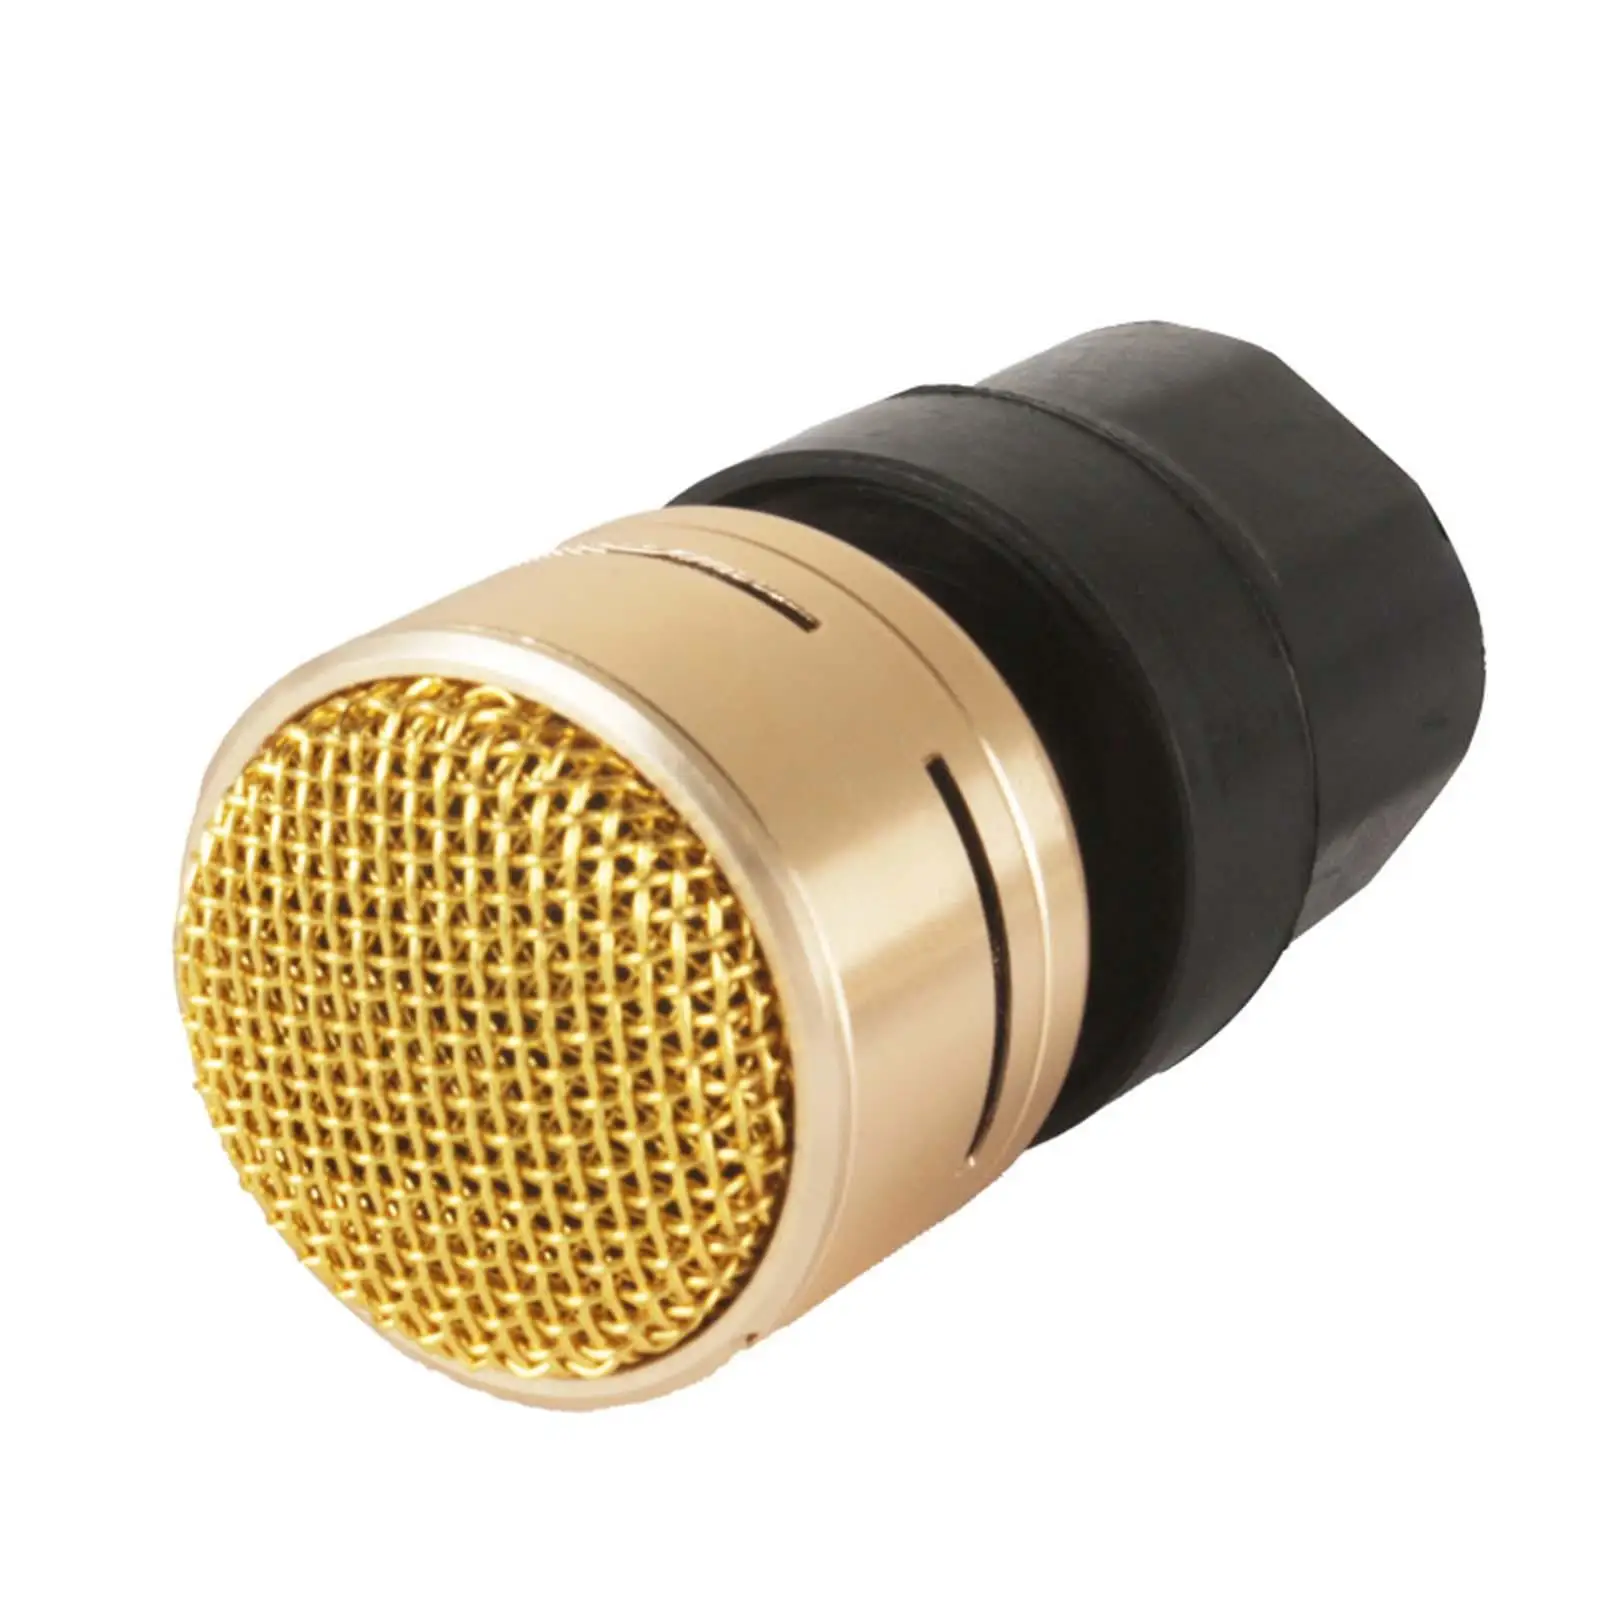 Microphone Cartridge Mic Sound Pickup Cartridge Wired Microphone High Sensitively Gold Professional Accessory Repair for N-m182